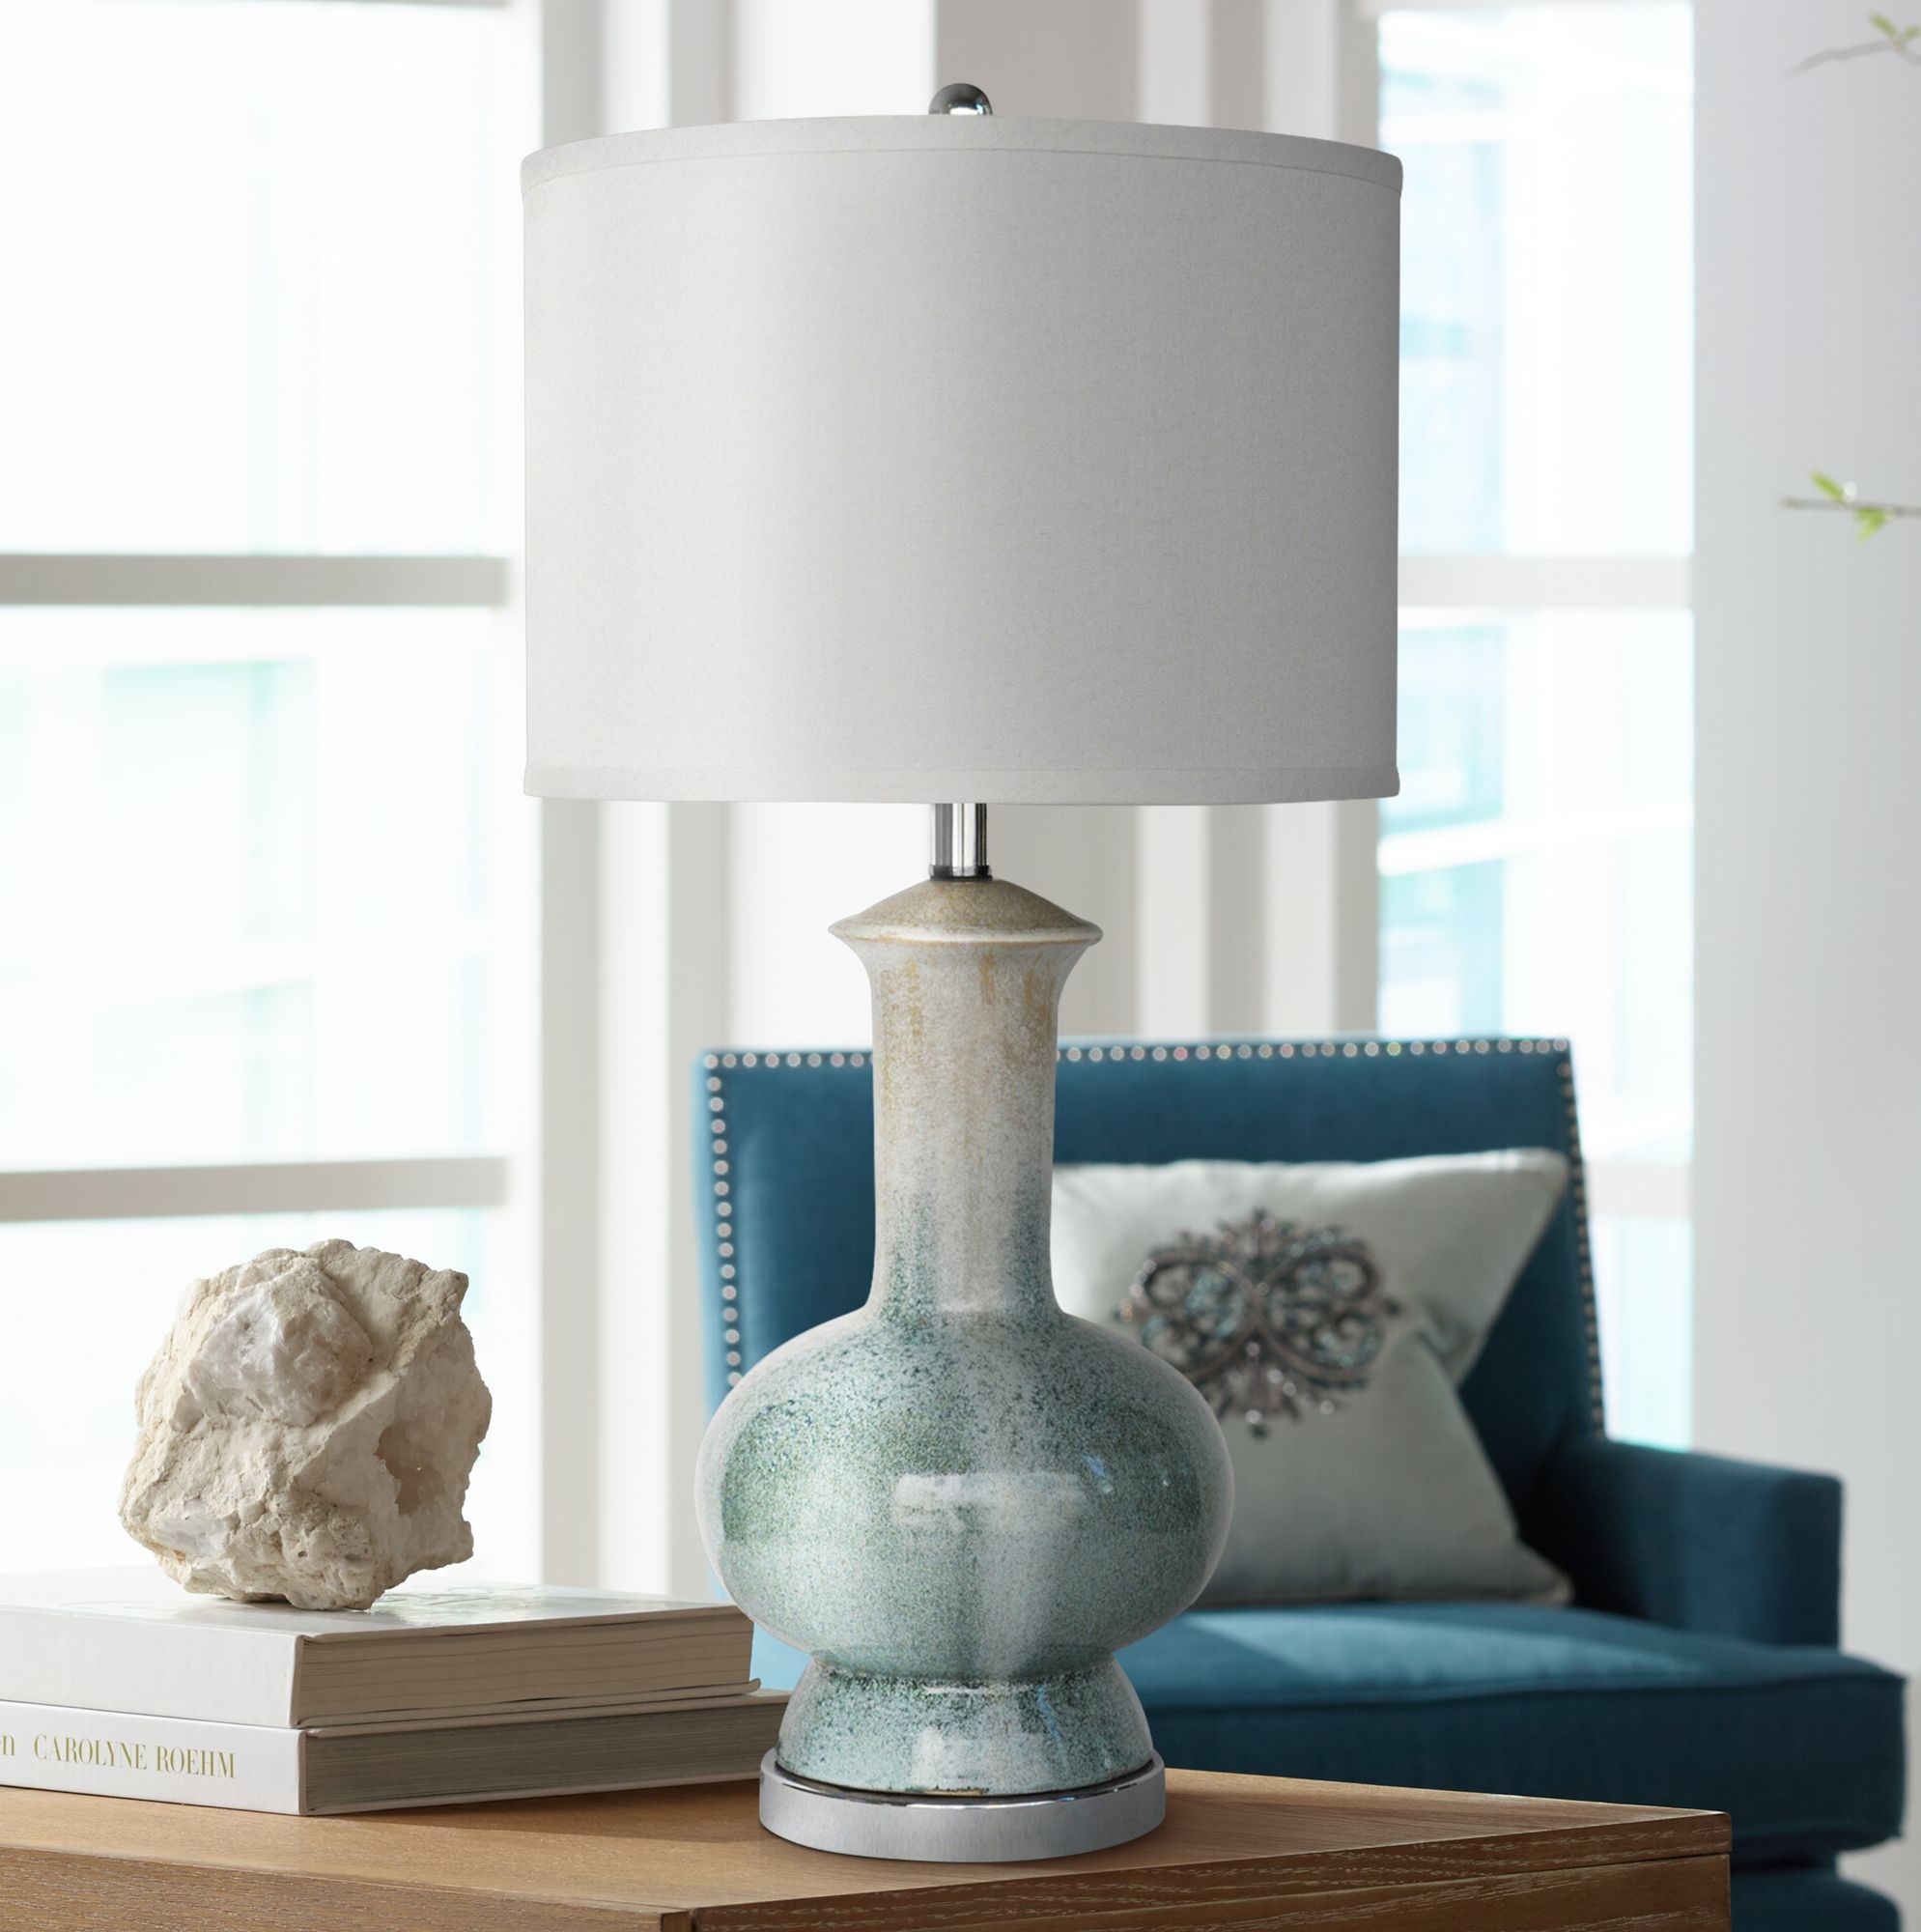 blue table lamps for living room